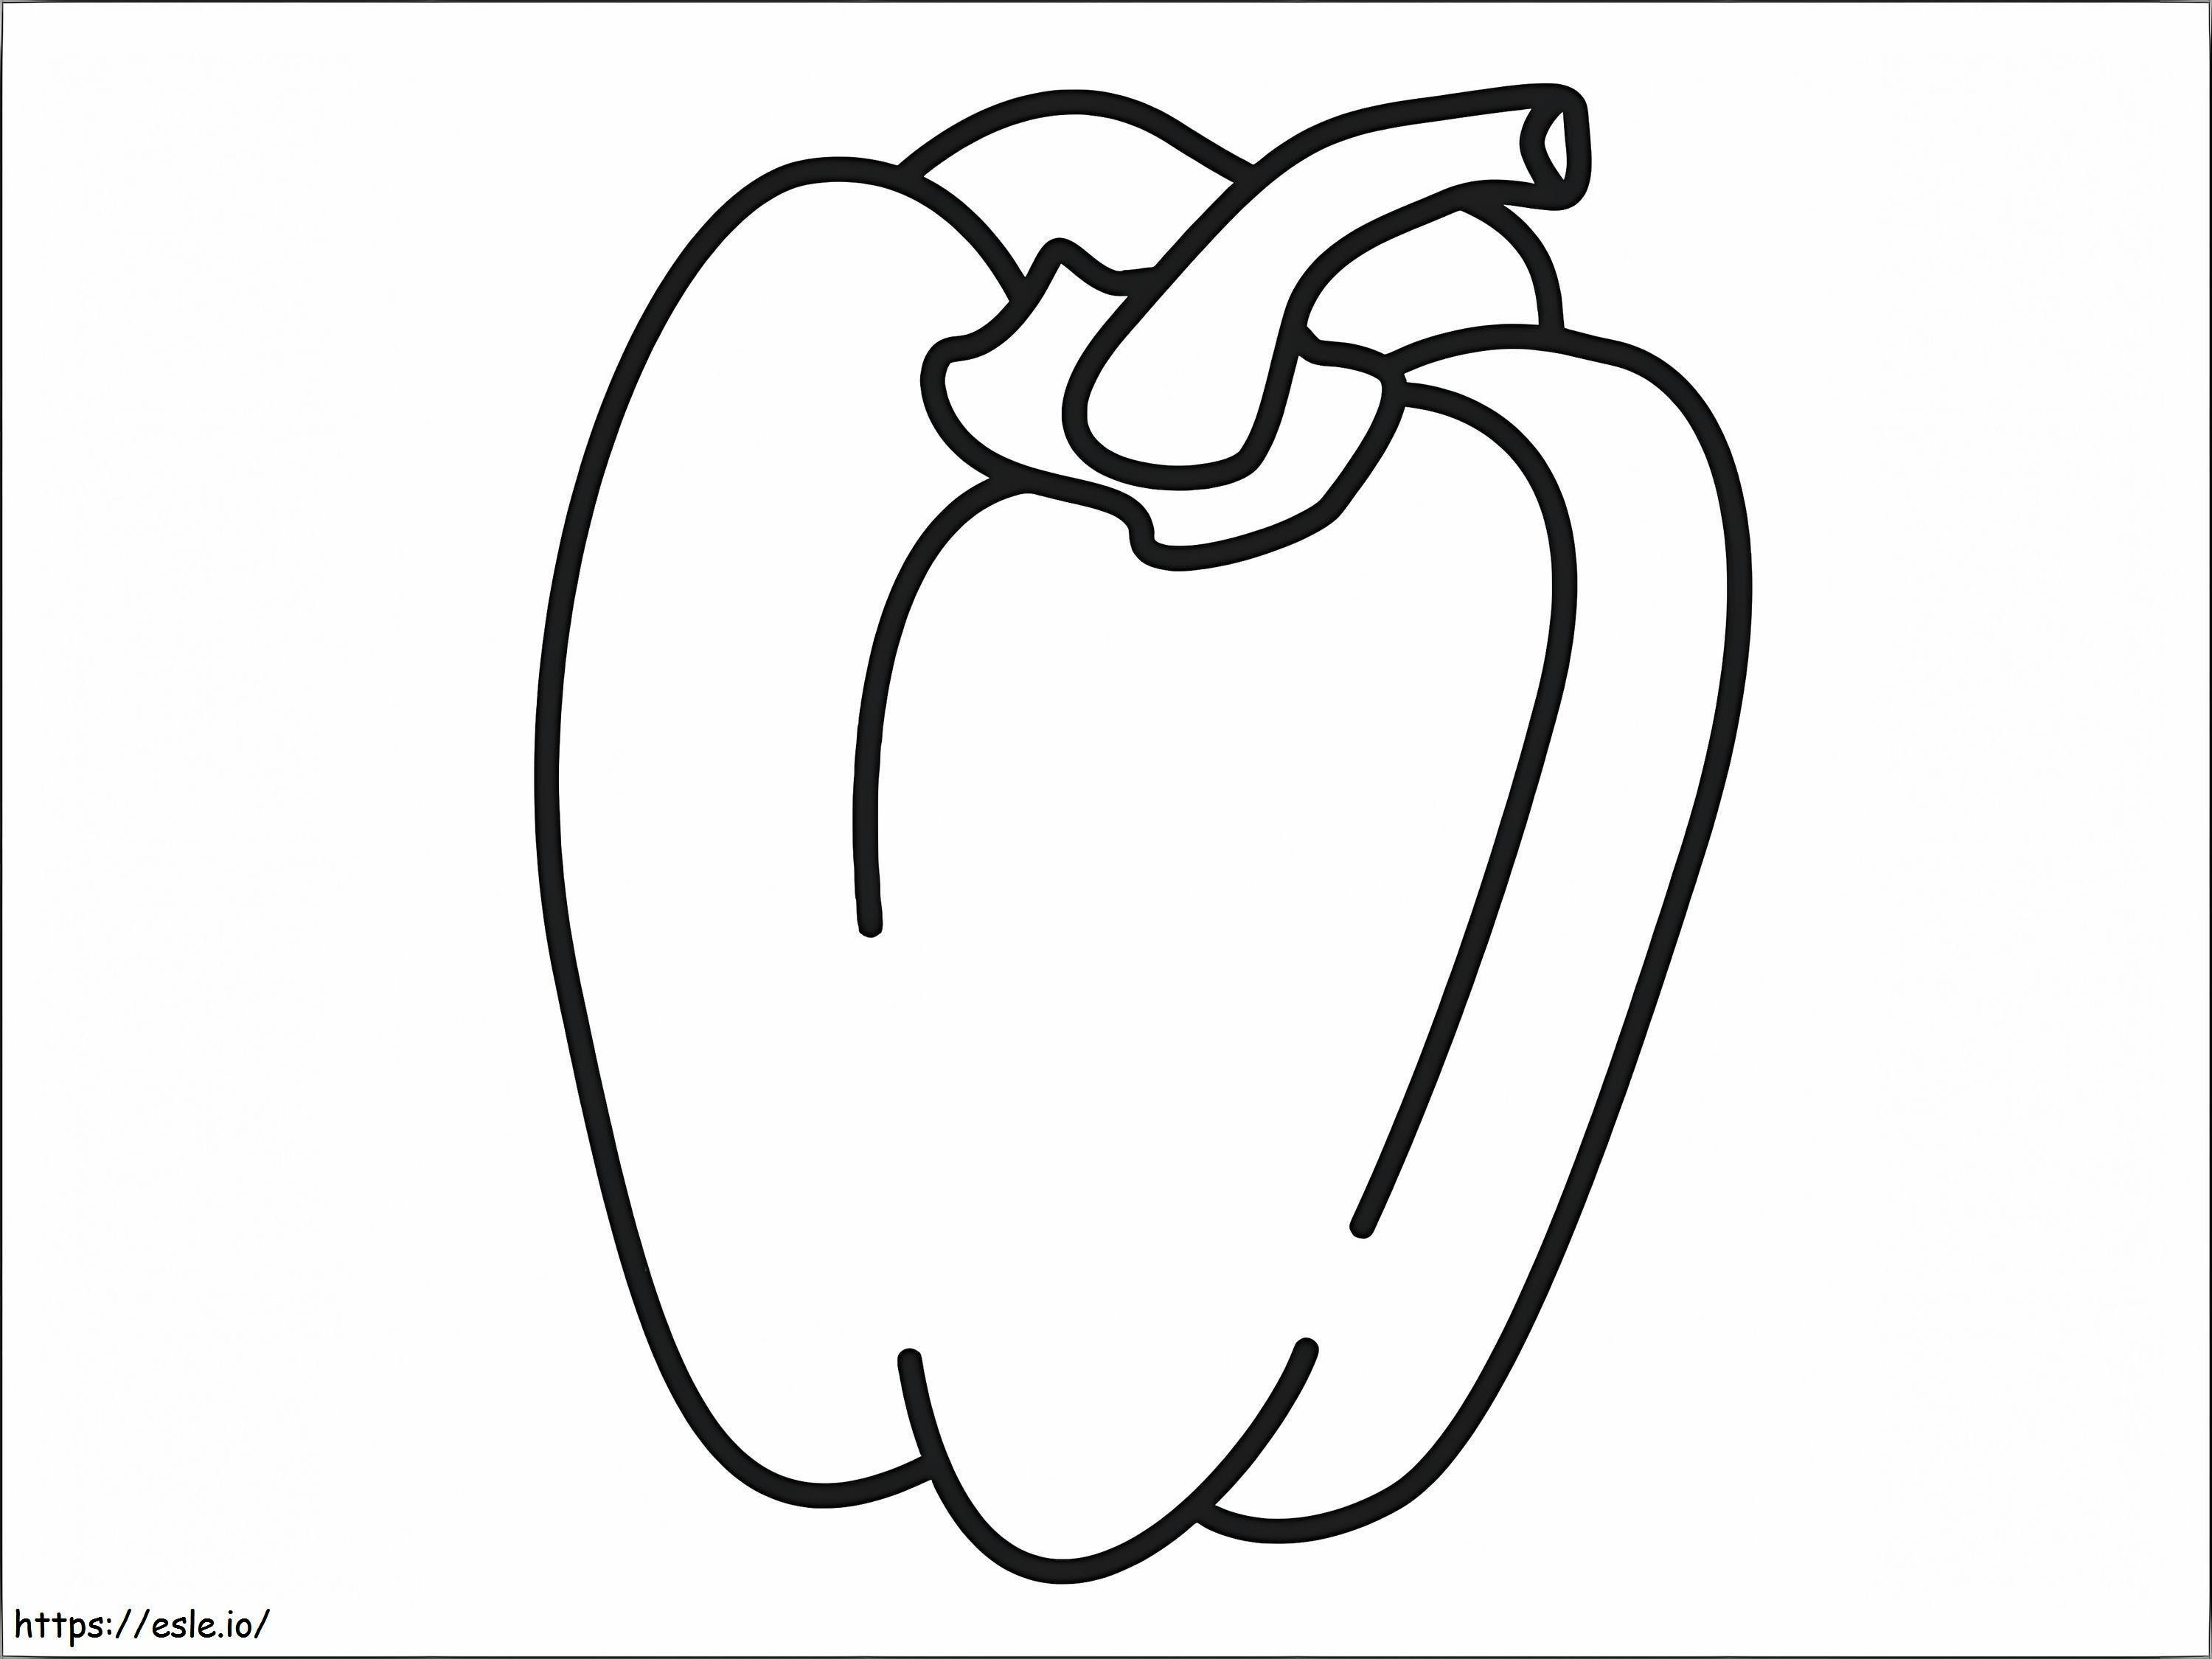 Nice Chiles coloring page